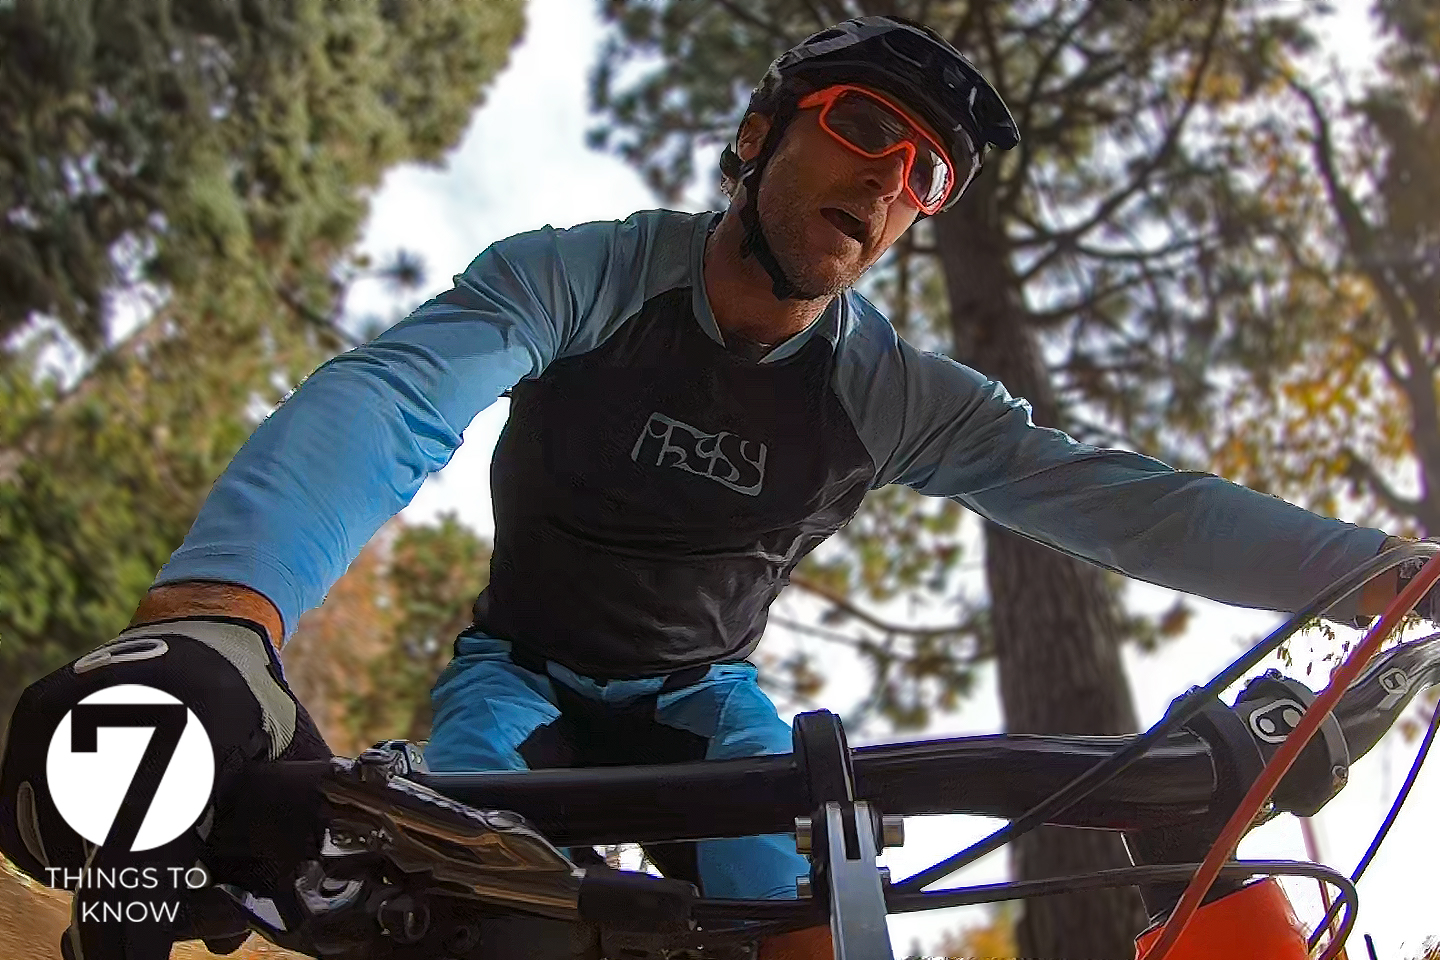 7 Things to Know Before You Buy Mountain Biking Glasses